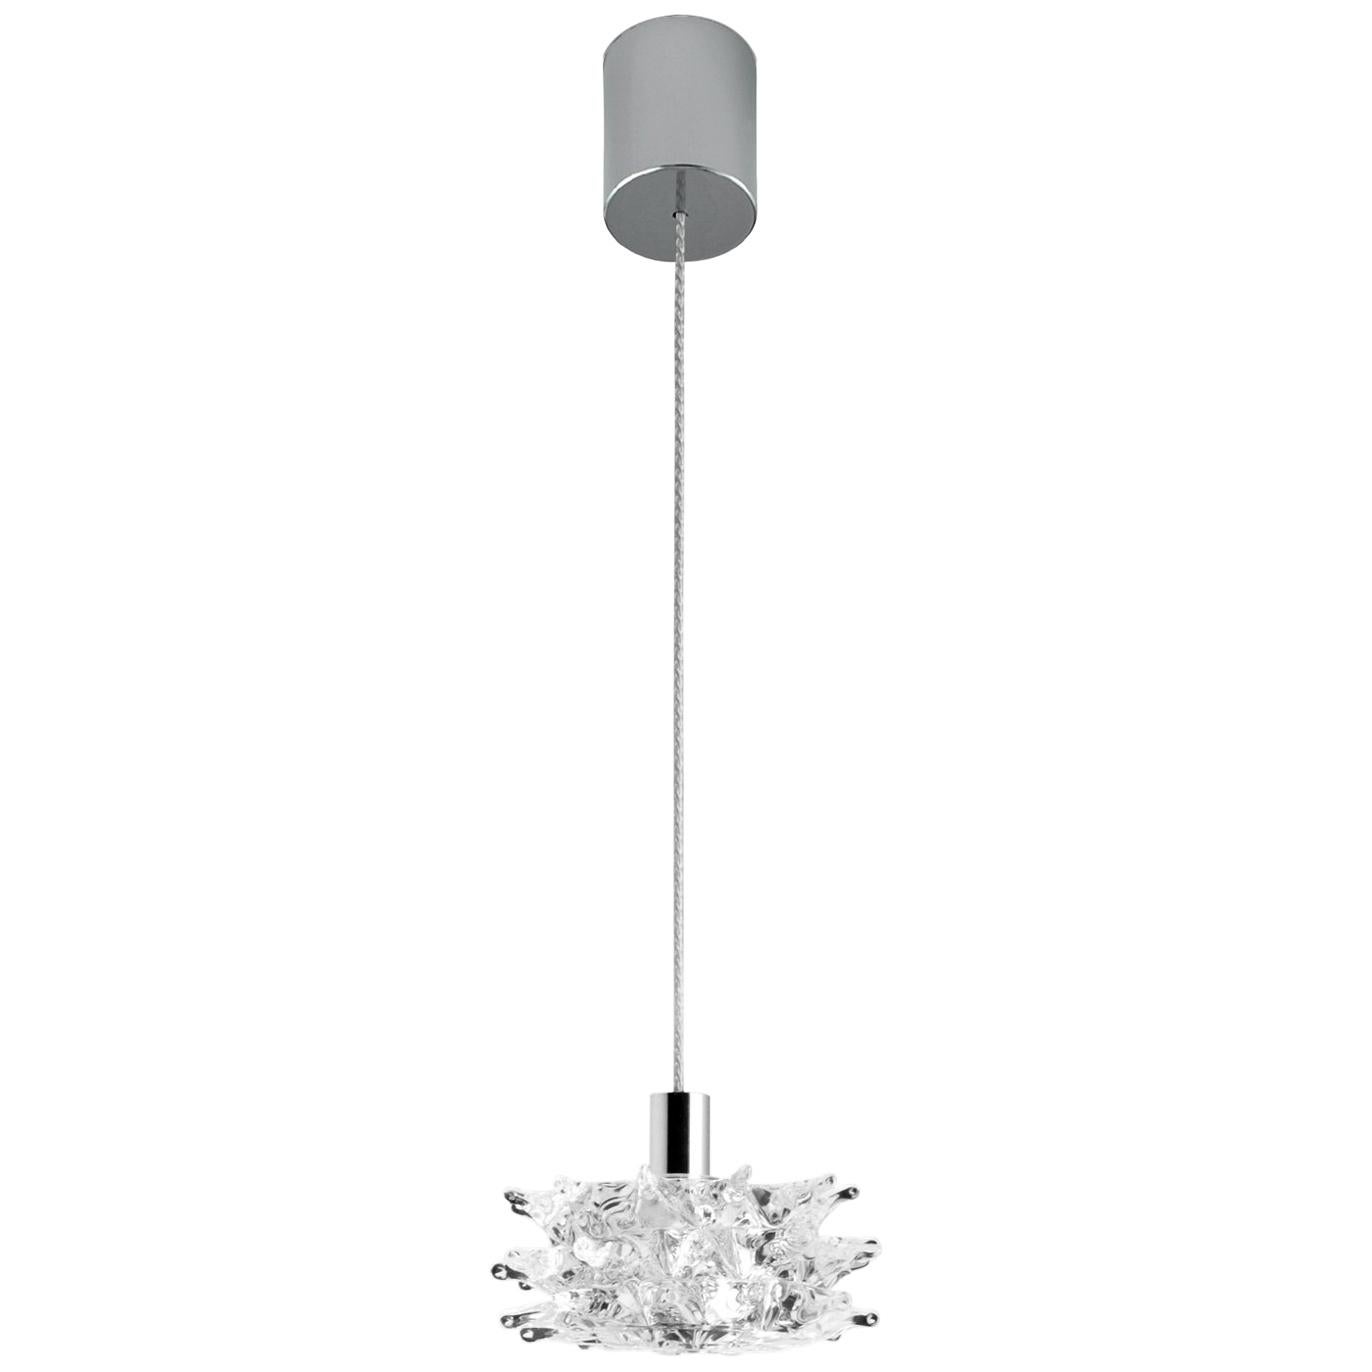 Leucos Kuk S G9 Pendant Light in Transparent & Chrome by Paolo Crepax 